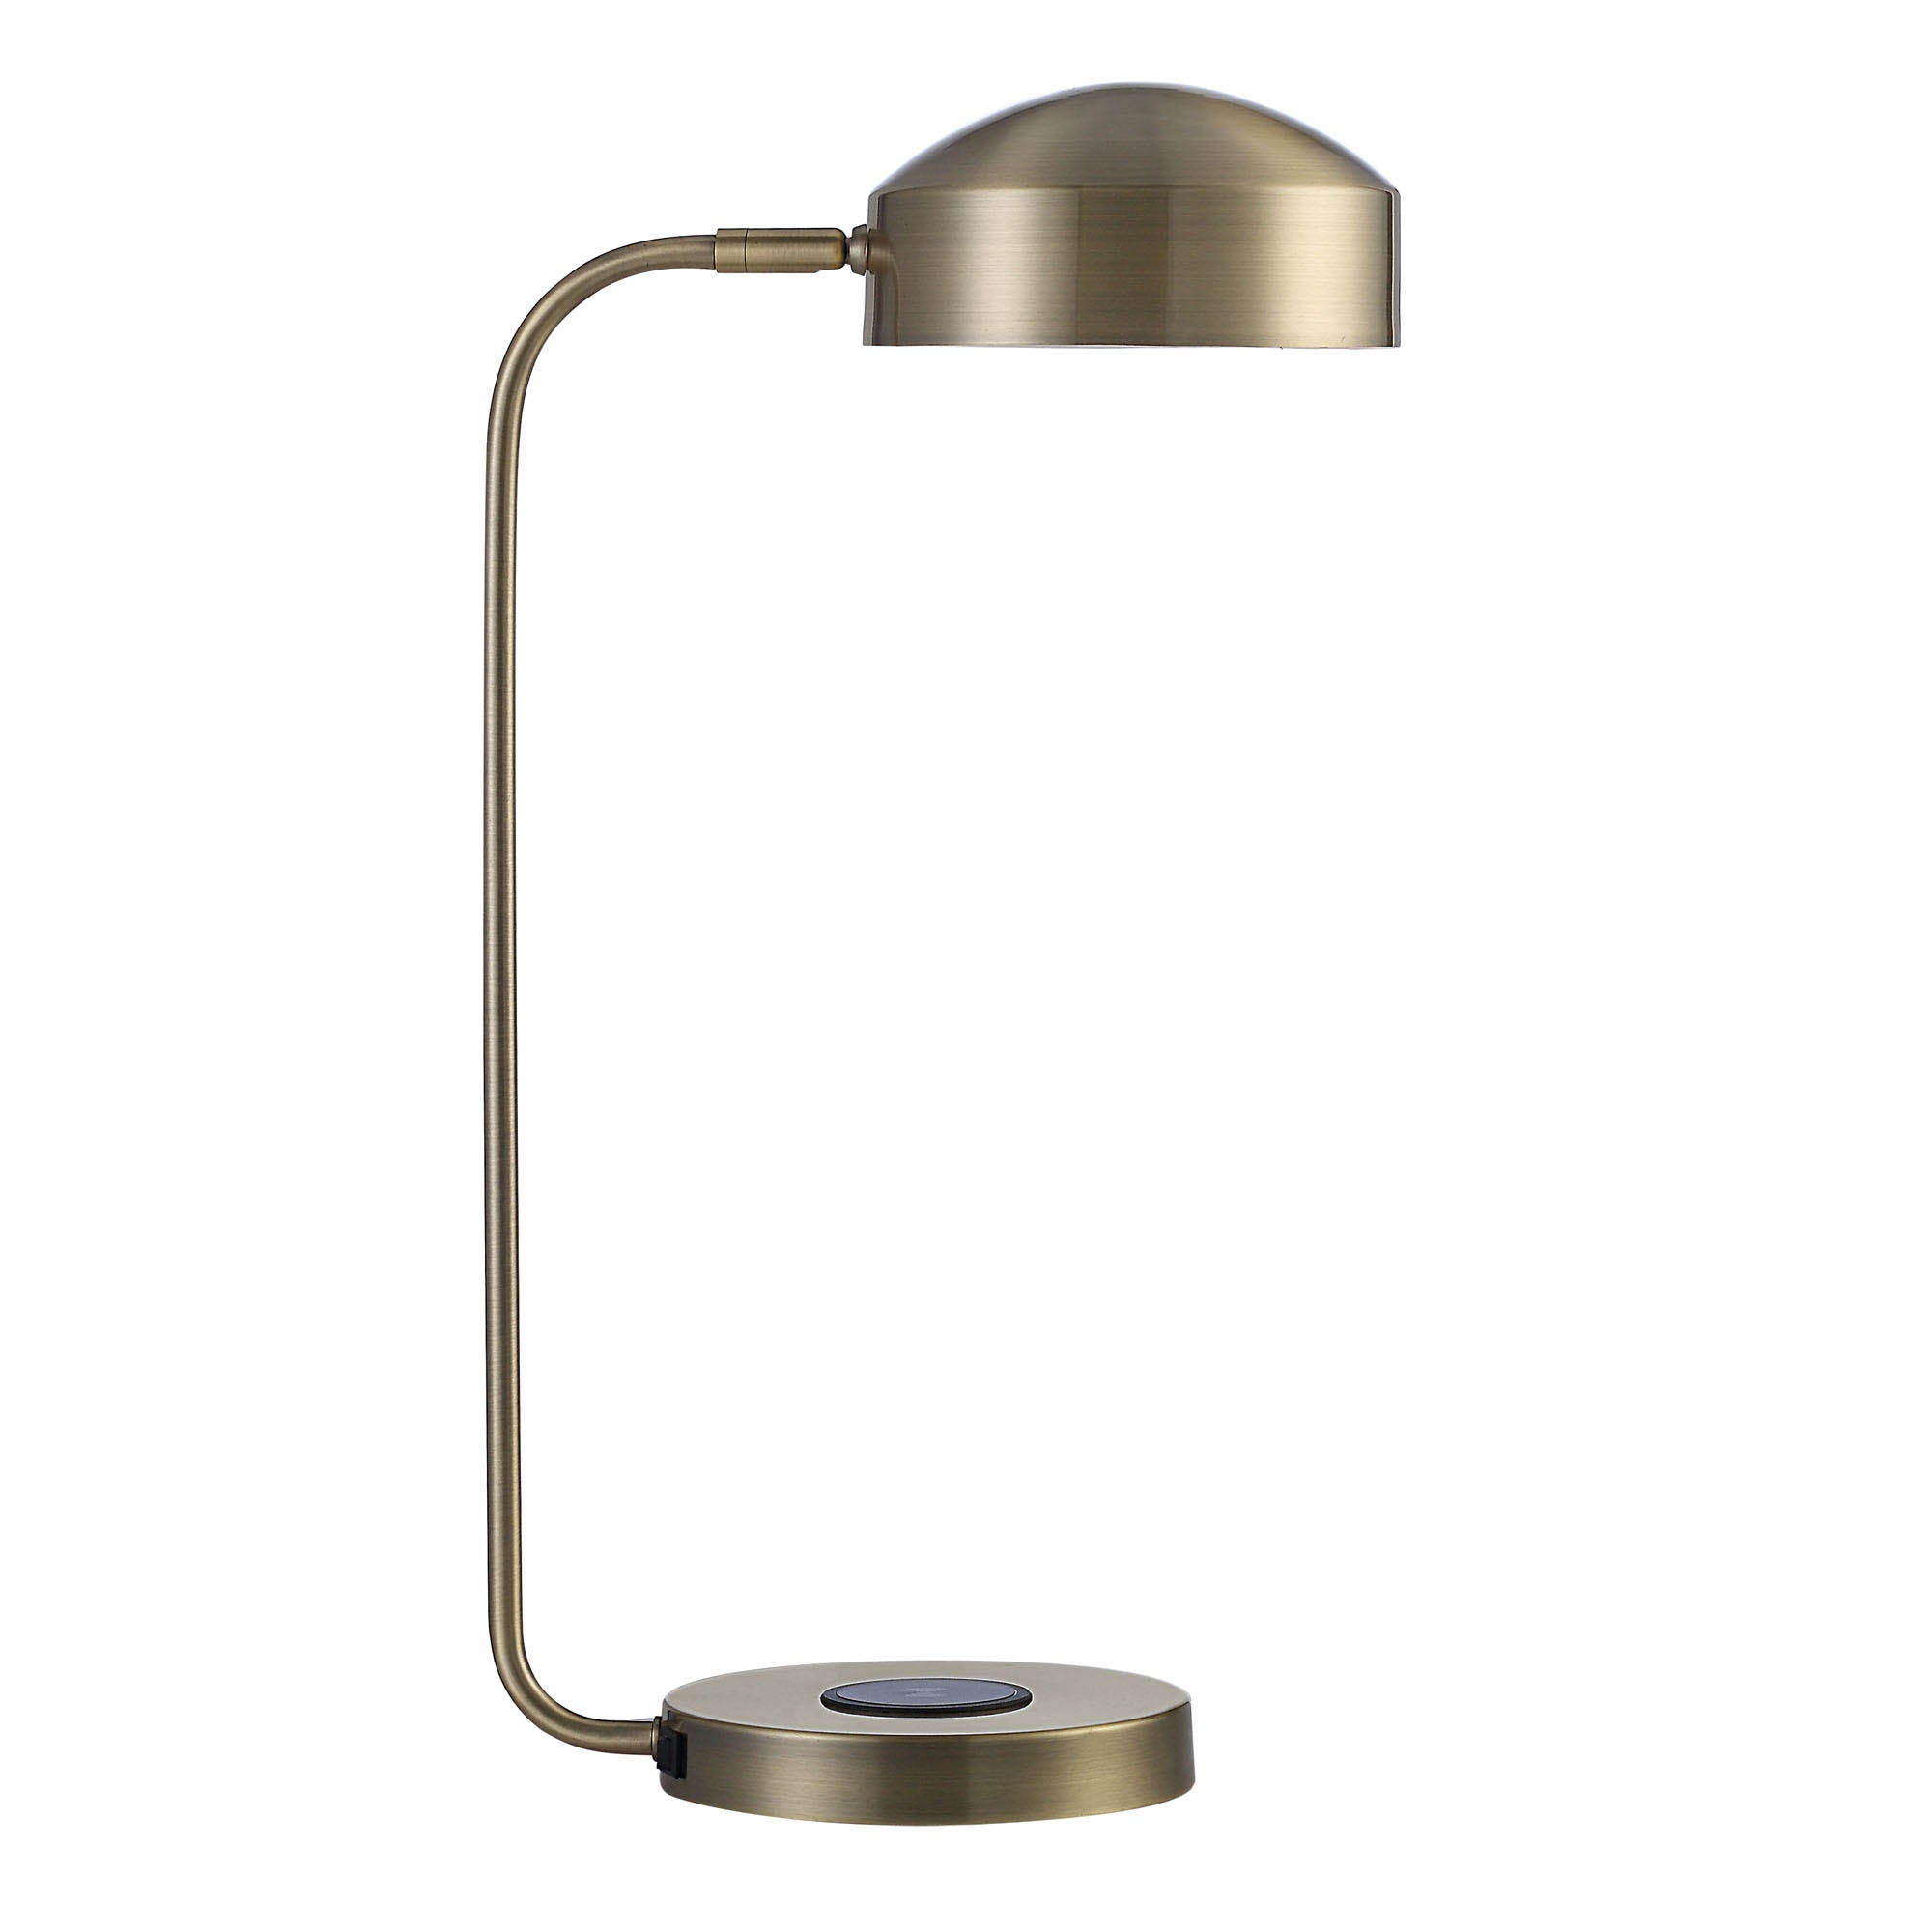 Renwil - RIESCO Table Lamp - LPT1214 - Brass